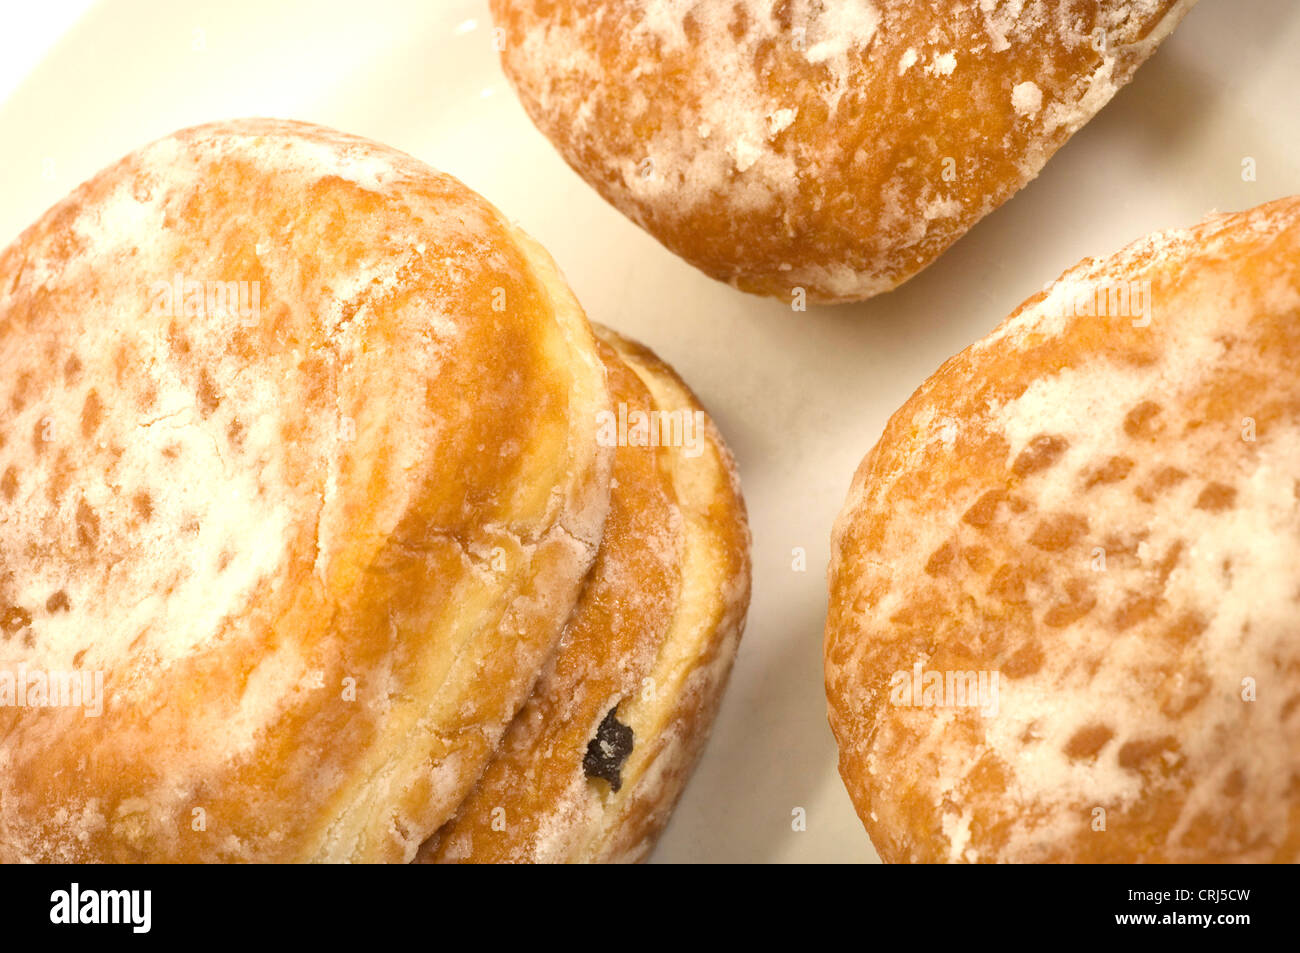 Doughnuts regarded by many as junk food. Stock Photo